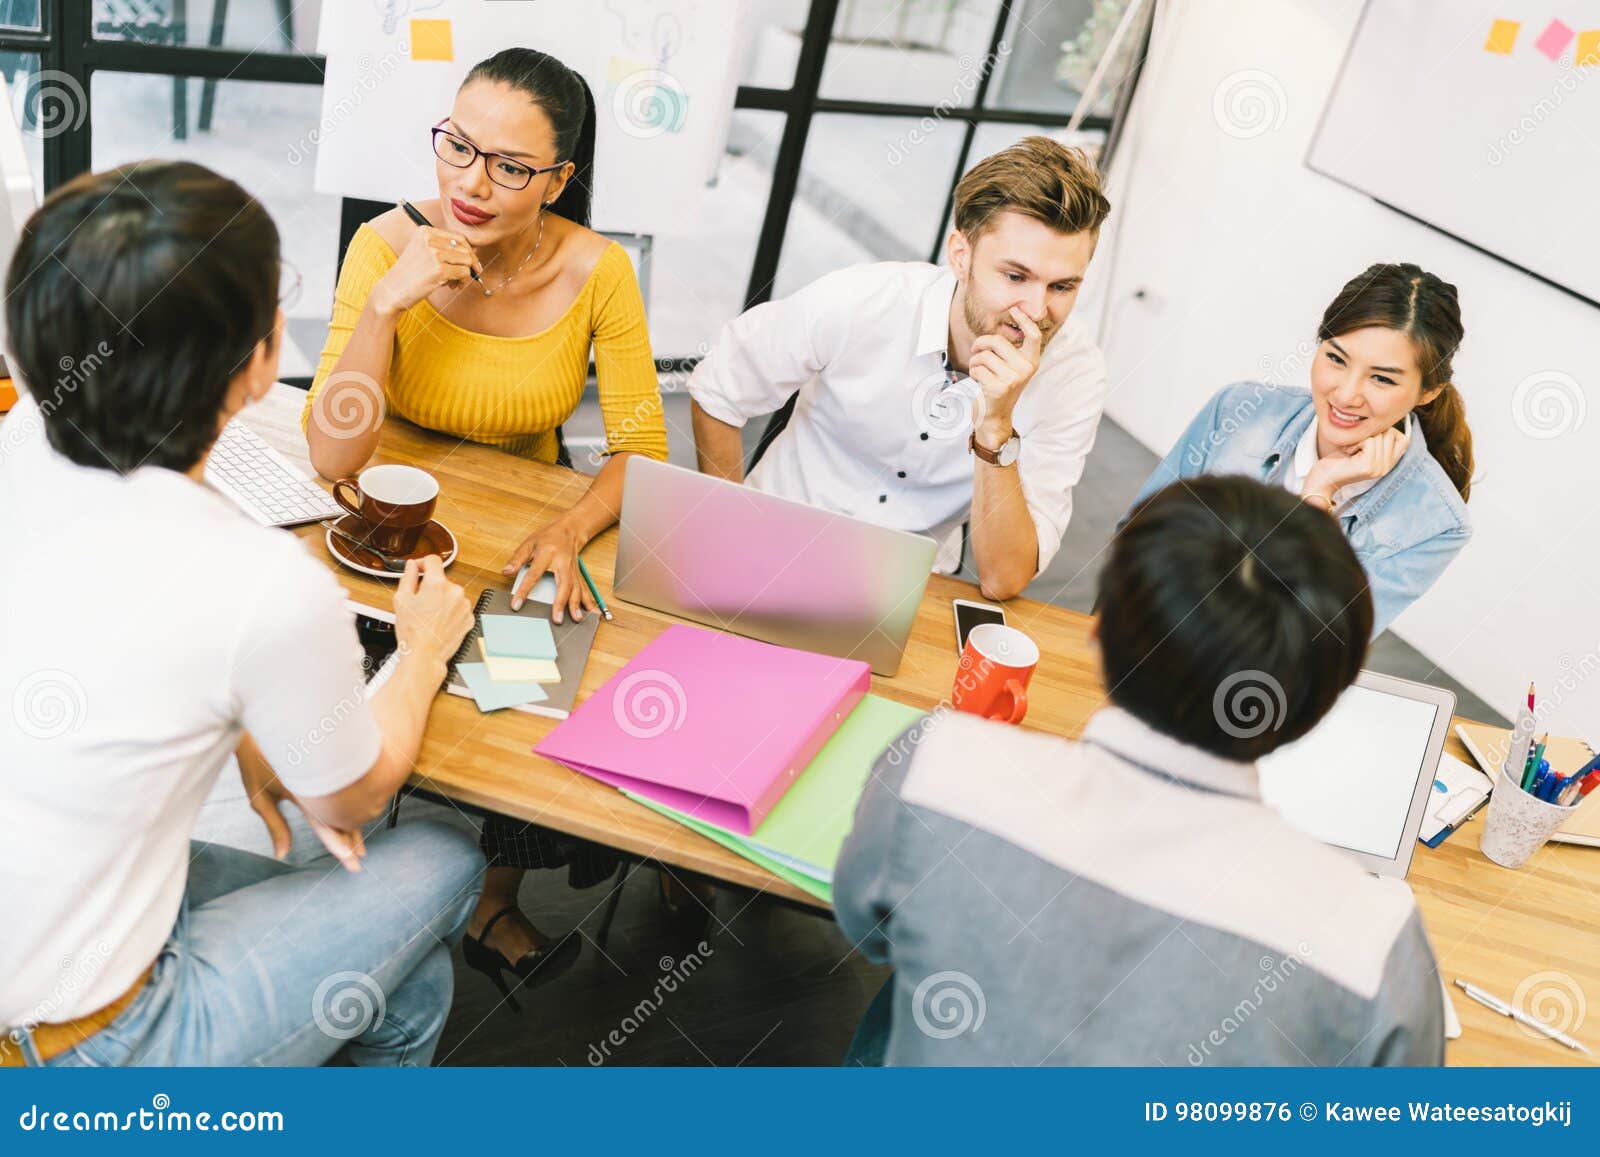 multiethnic diverse group of people at work. creative team, casual business coworker, or college students in project meeting